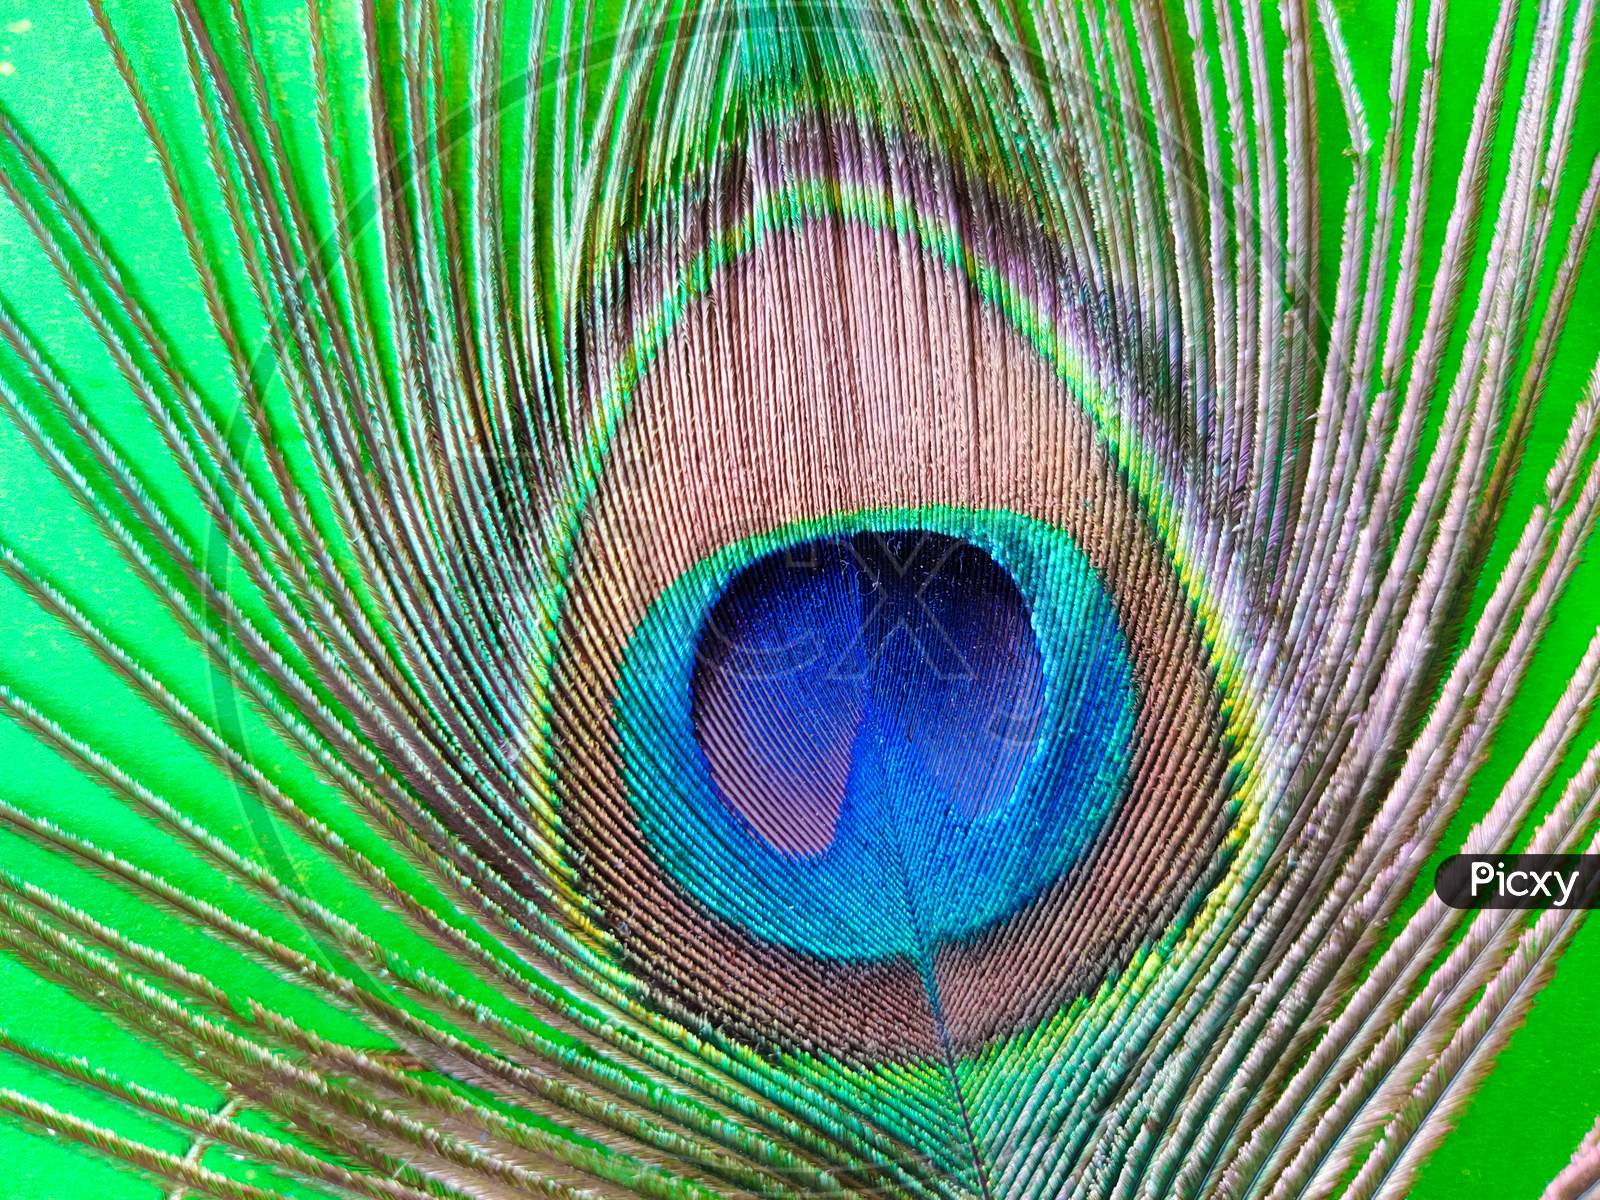 Close Up Shot Of Beautiful Peacock Feather Filling The Frame.